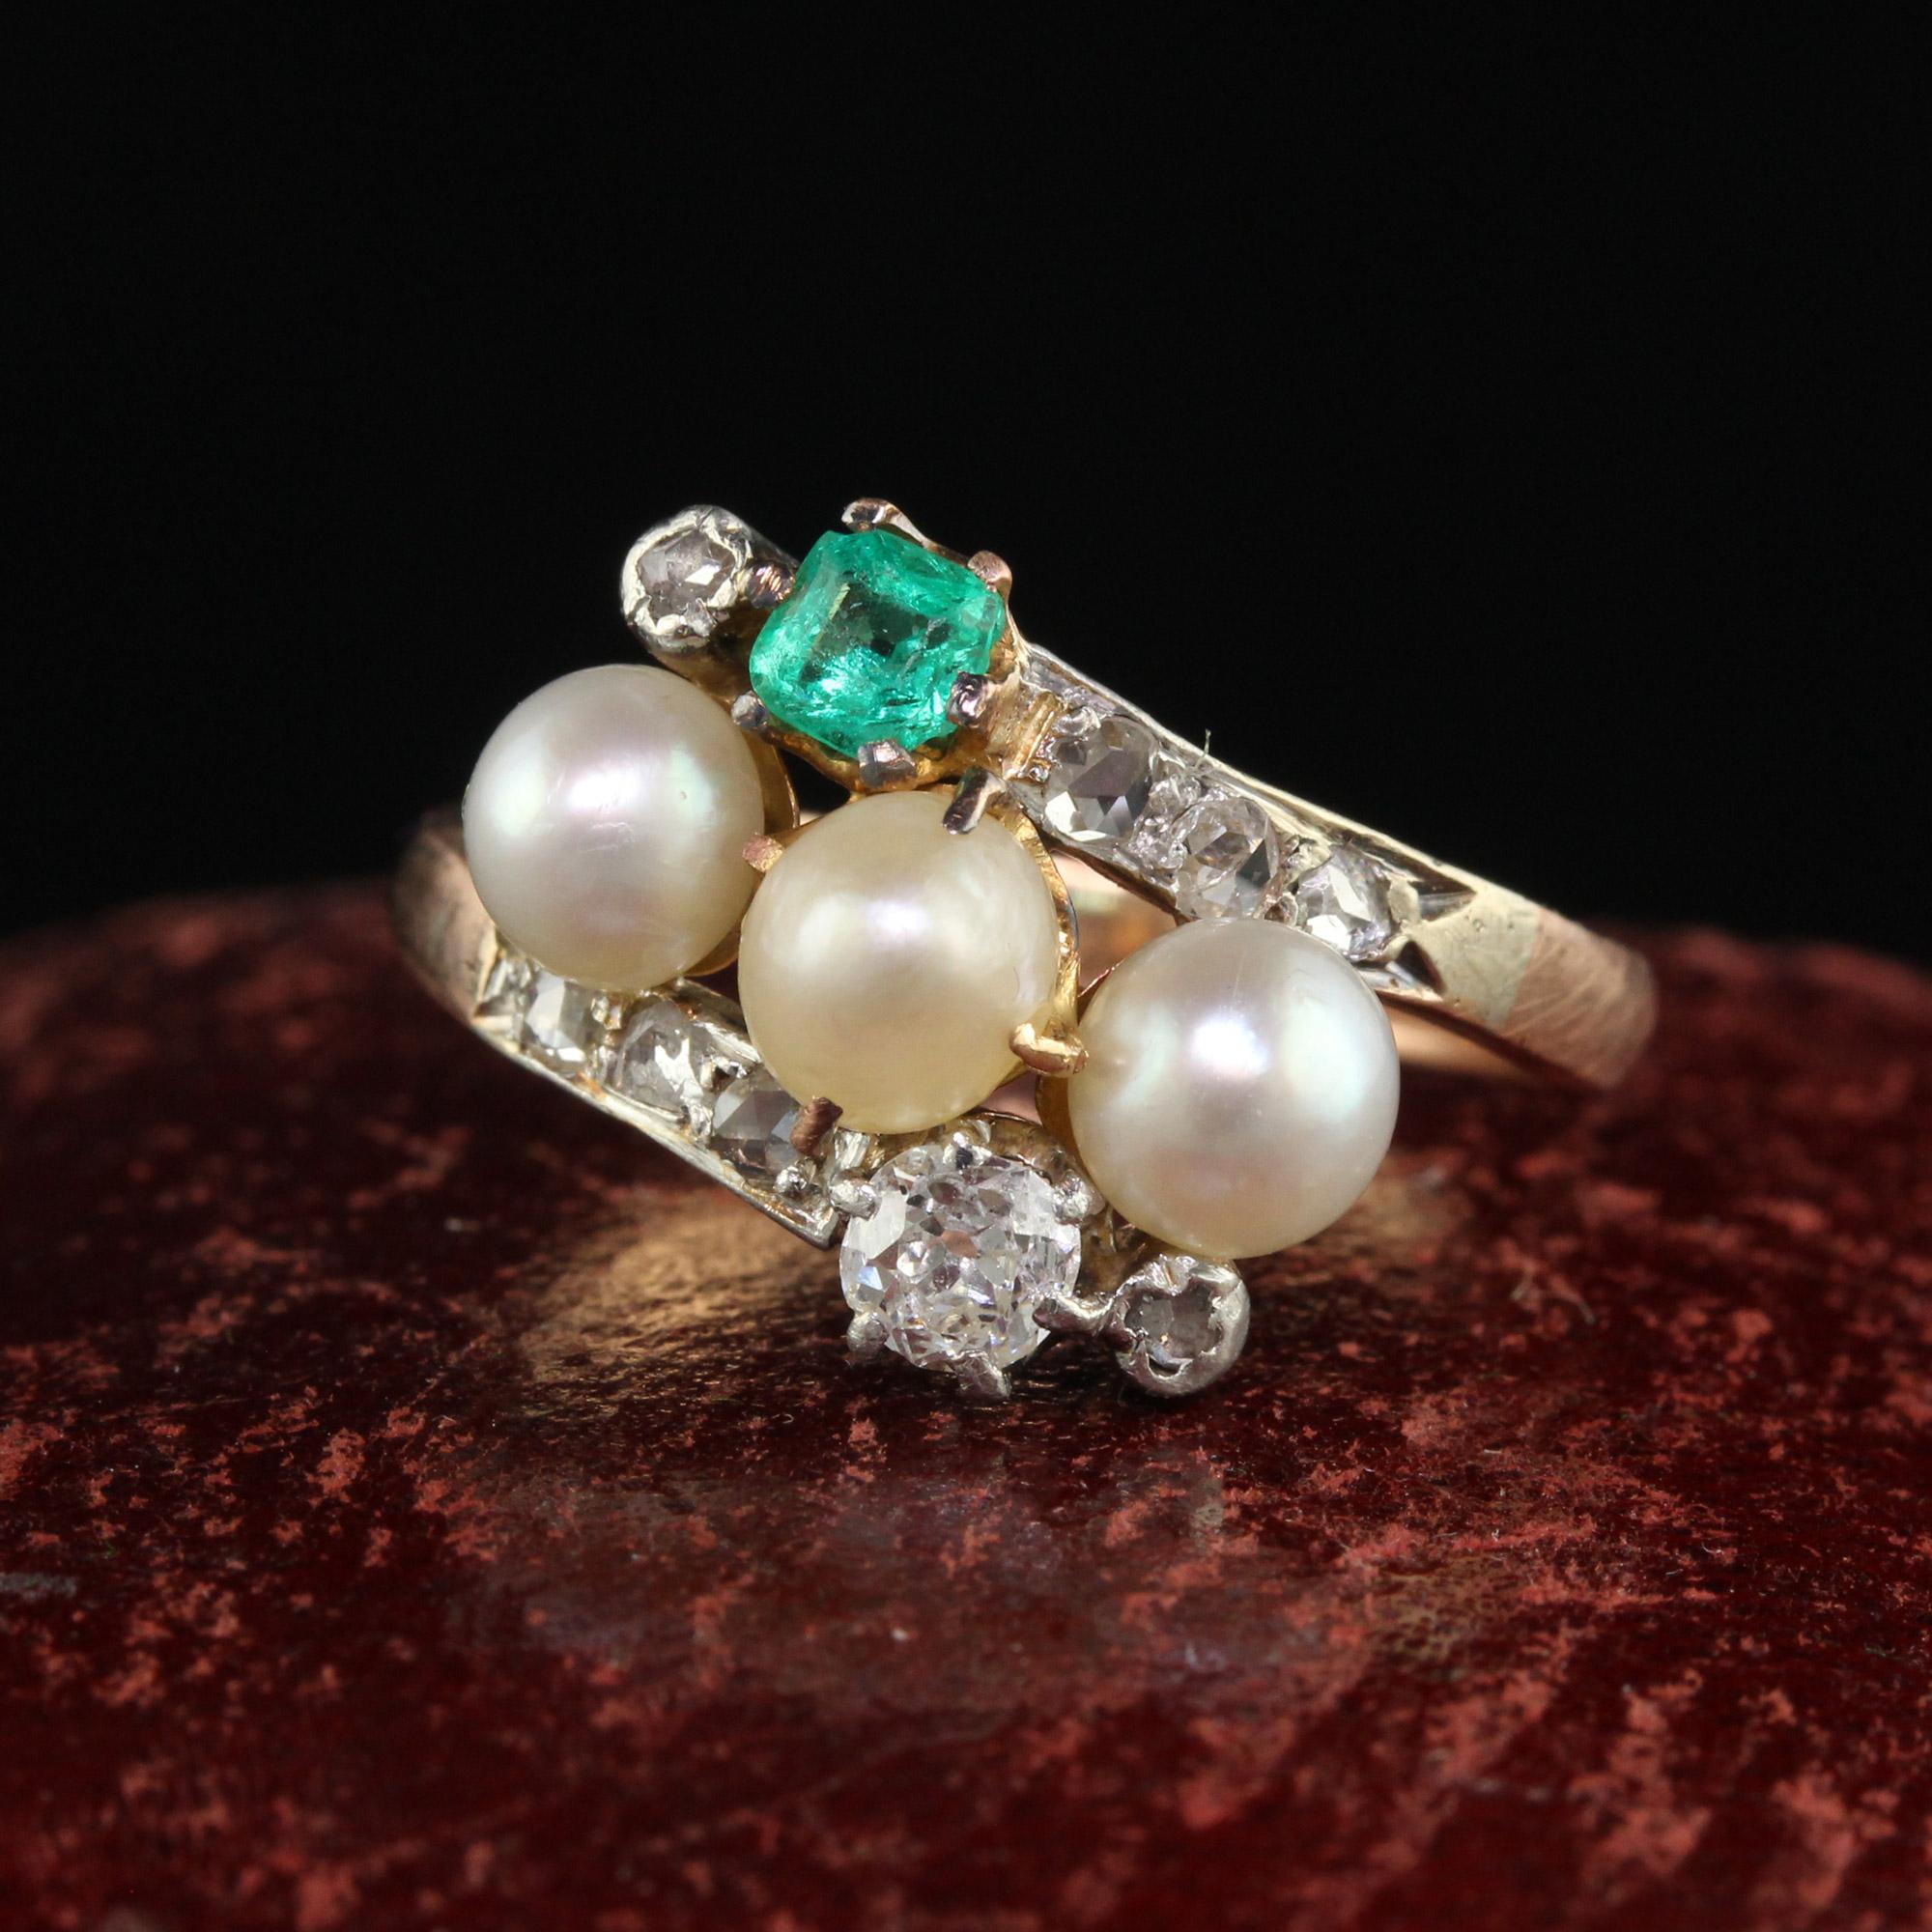 Beautiful Antique Victorian 14K Rose Gold Silver Old Mine Pearl Emerald Cocktail Ring. This gorgeous cocktail ring is crafted in 14k rose gold and silver top. The ring holds a row of beautiful pearls in the center with an old mine cut diamond and an